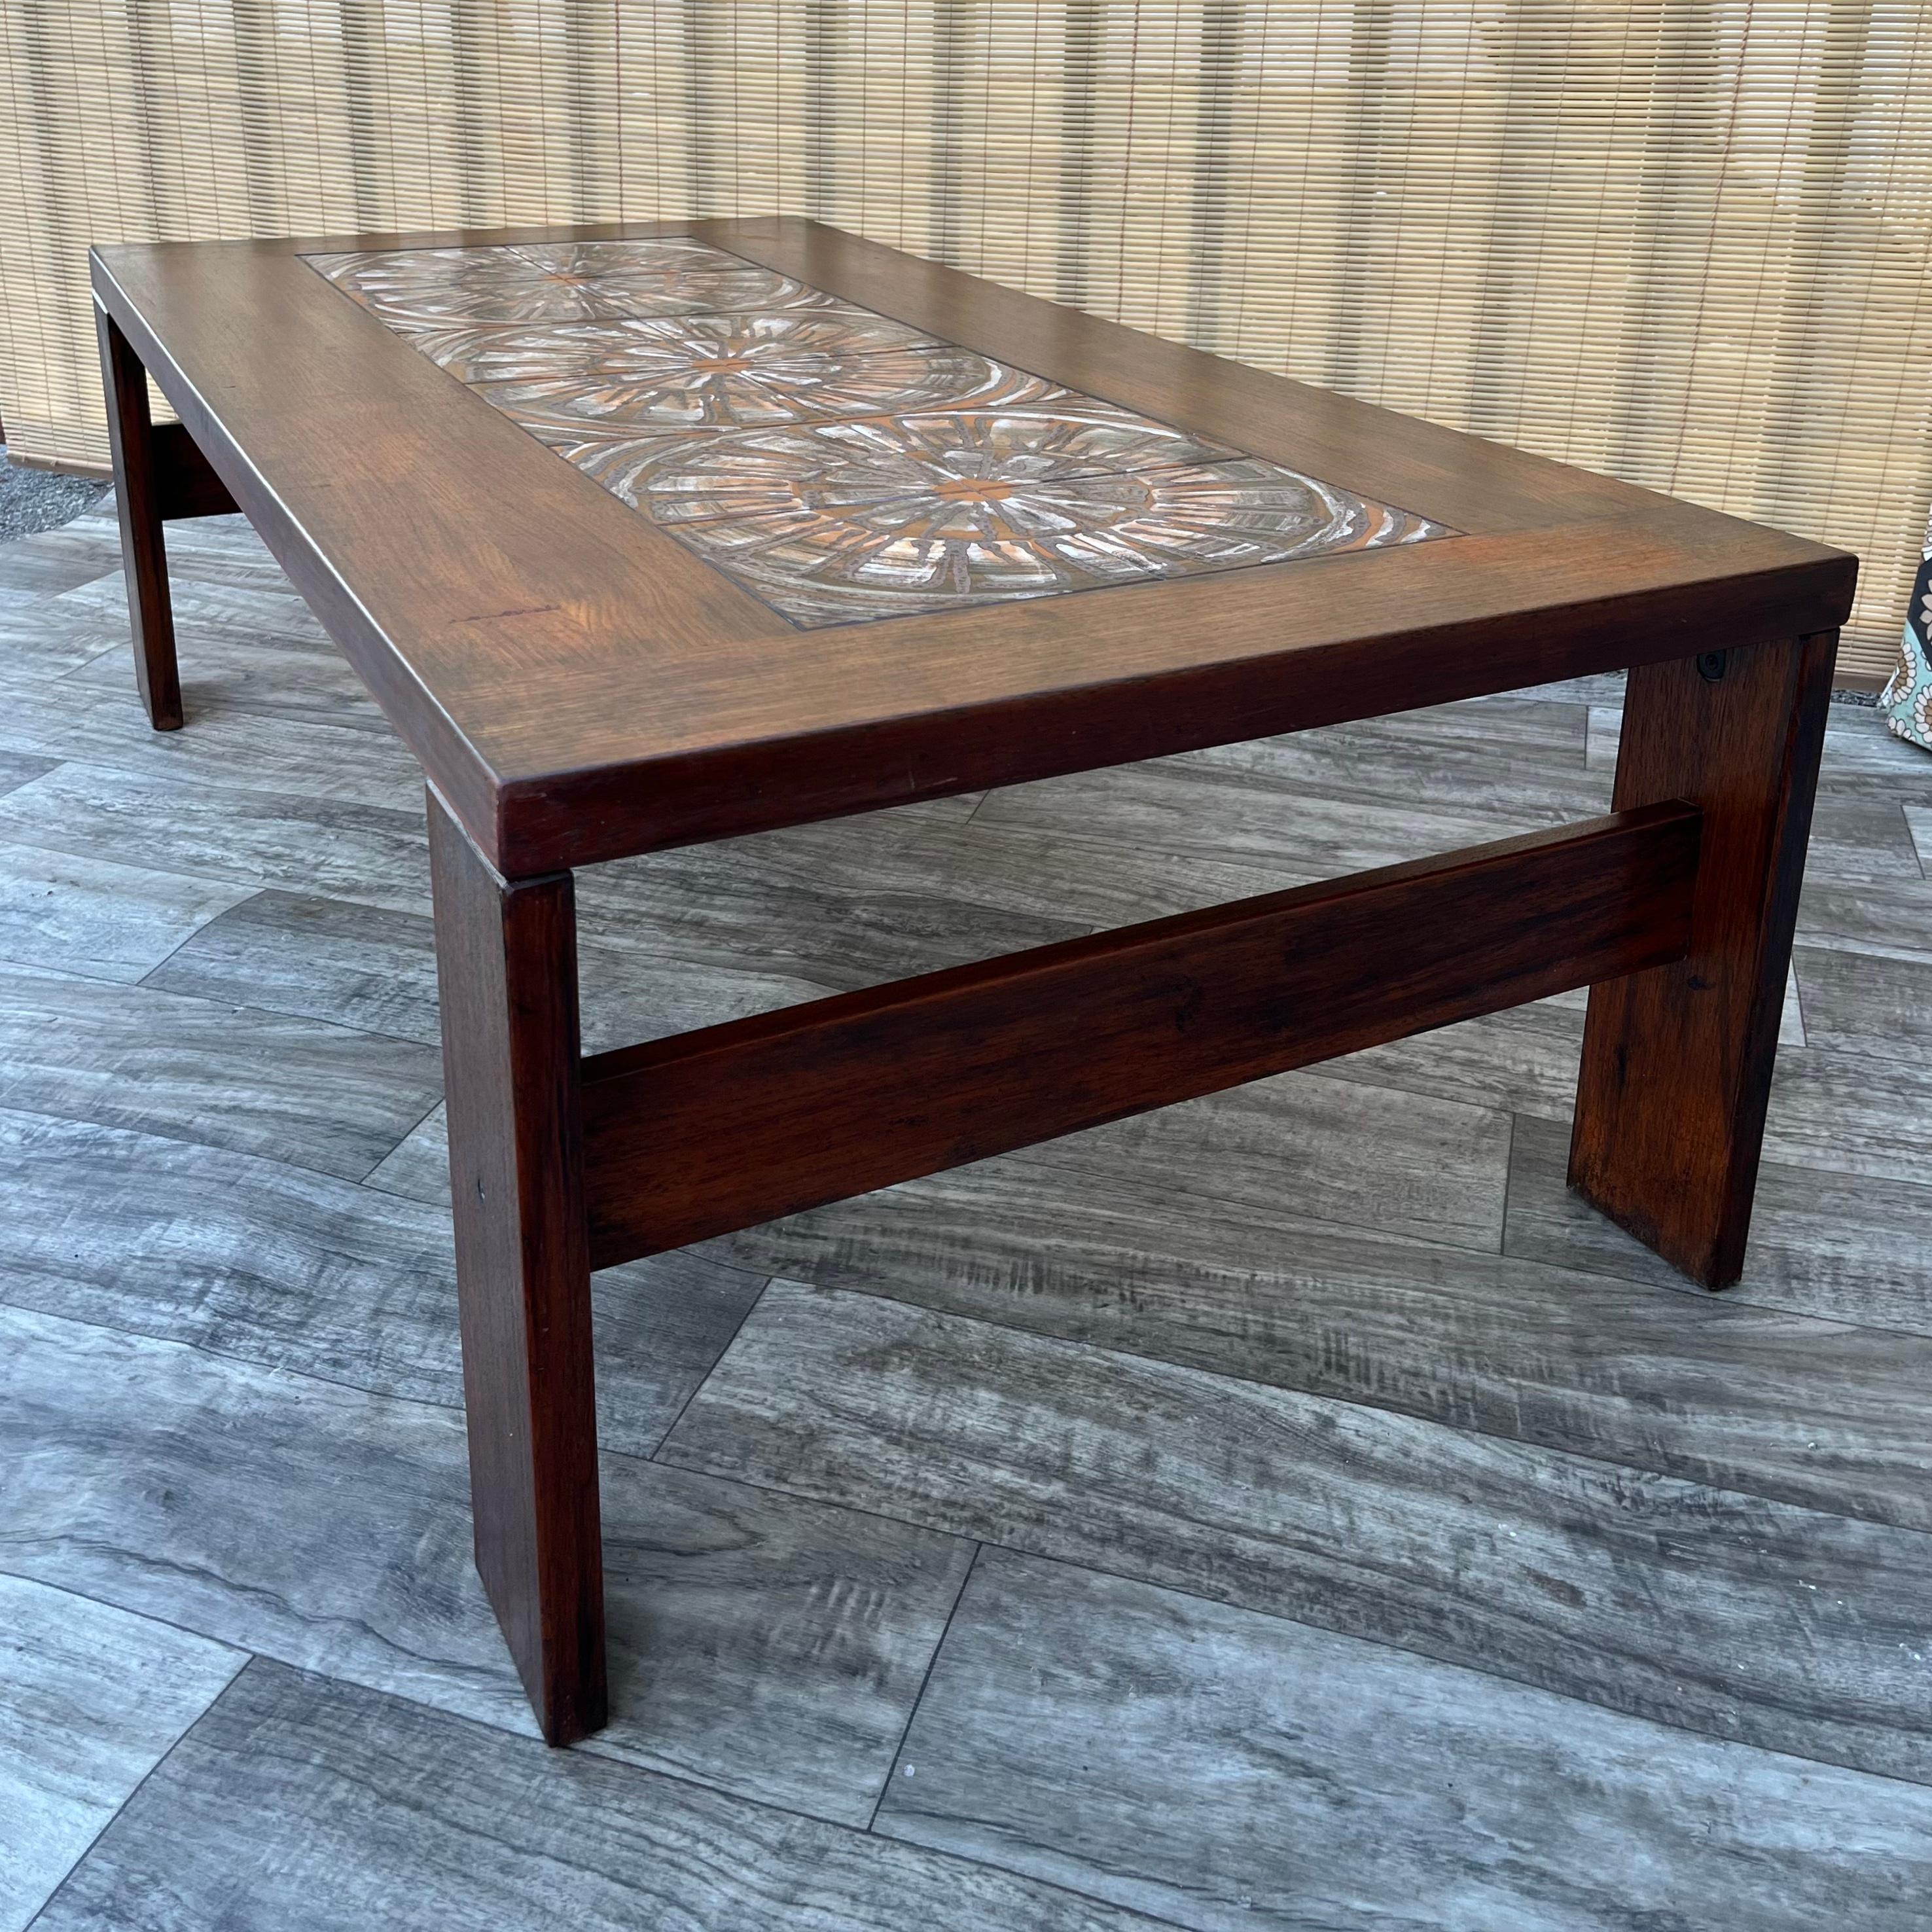 Danish Mid Century Modern Coffee Table With Ceramic Tile Inlays. Circa 1960s  For Sale 6